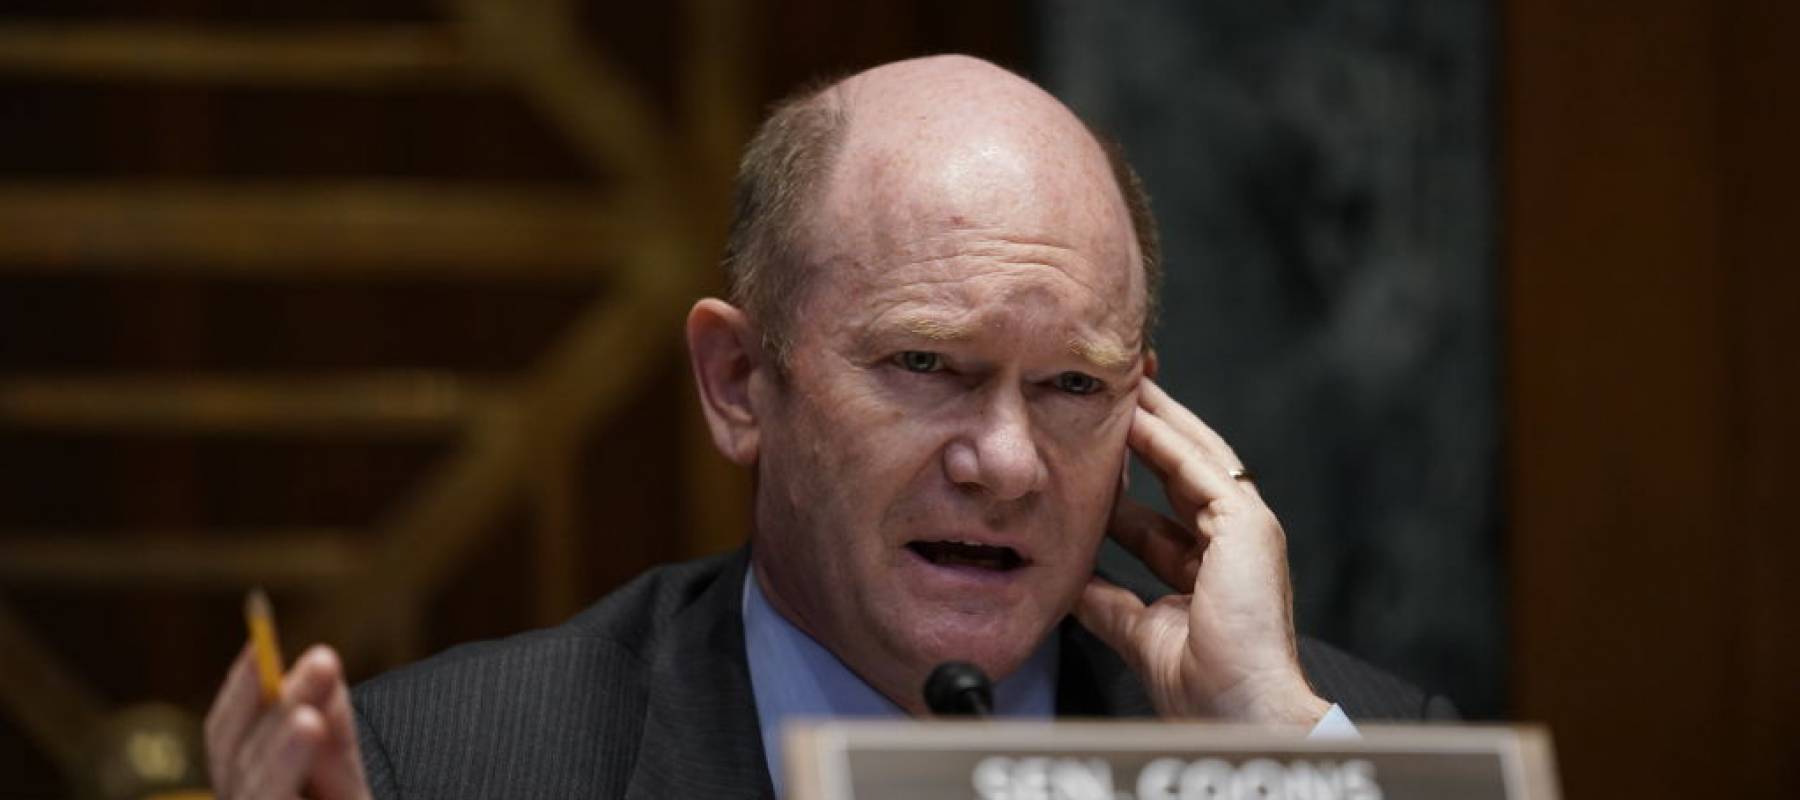 Sen. Chris Coons presses his hand up against his head as he speaks in the Senate.